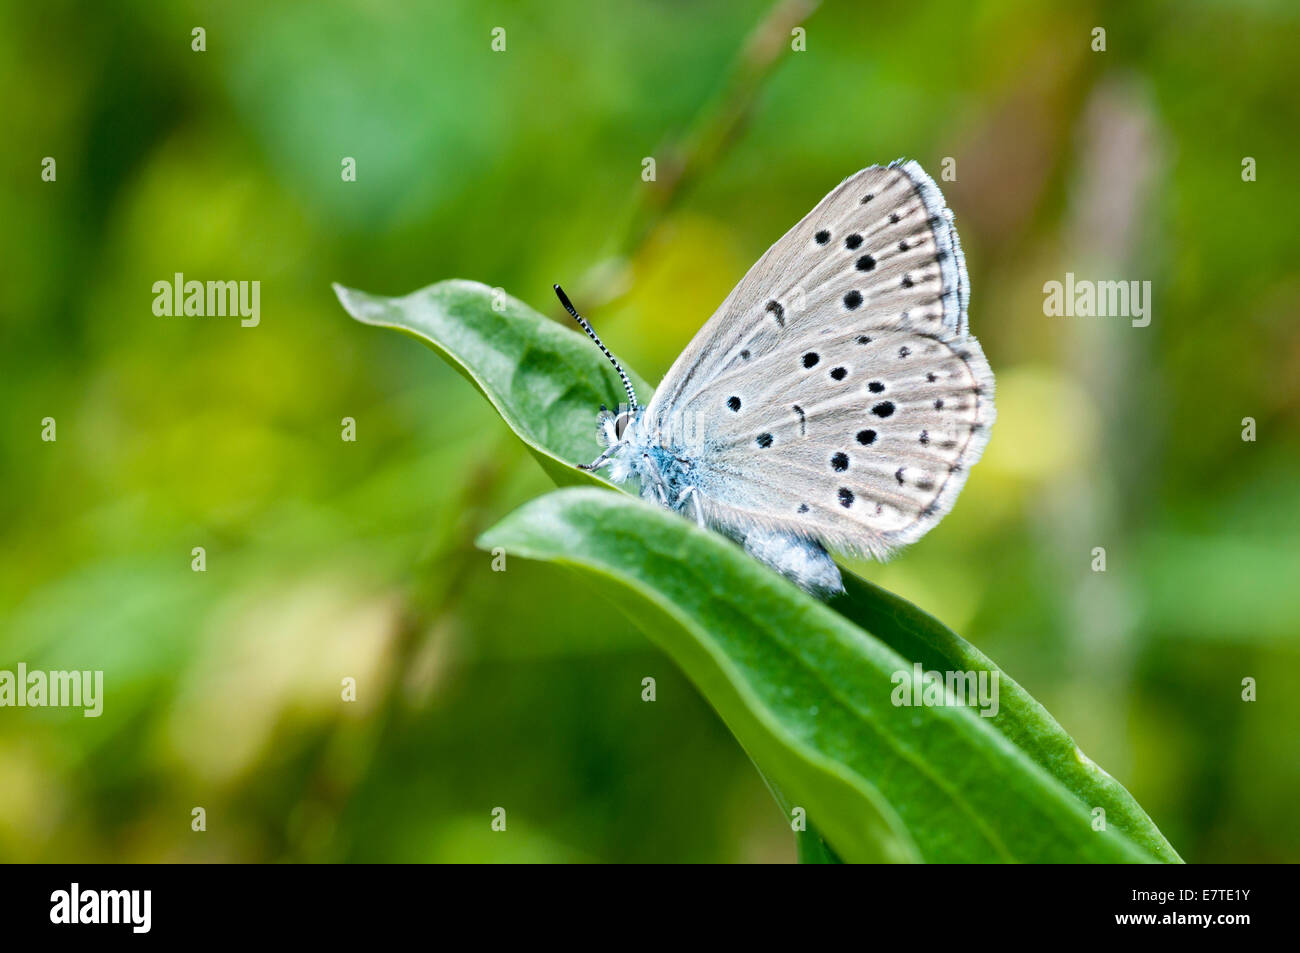 Shot of the endangered Alcon Blue resting on a leaf Stock Photo